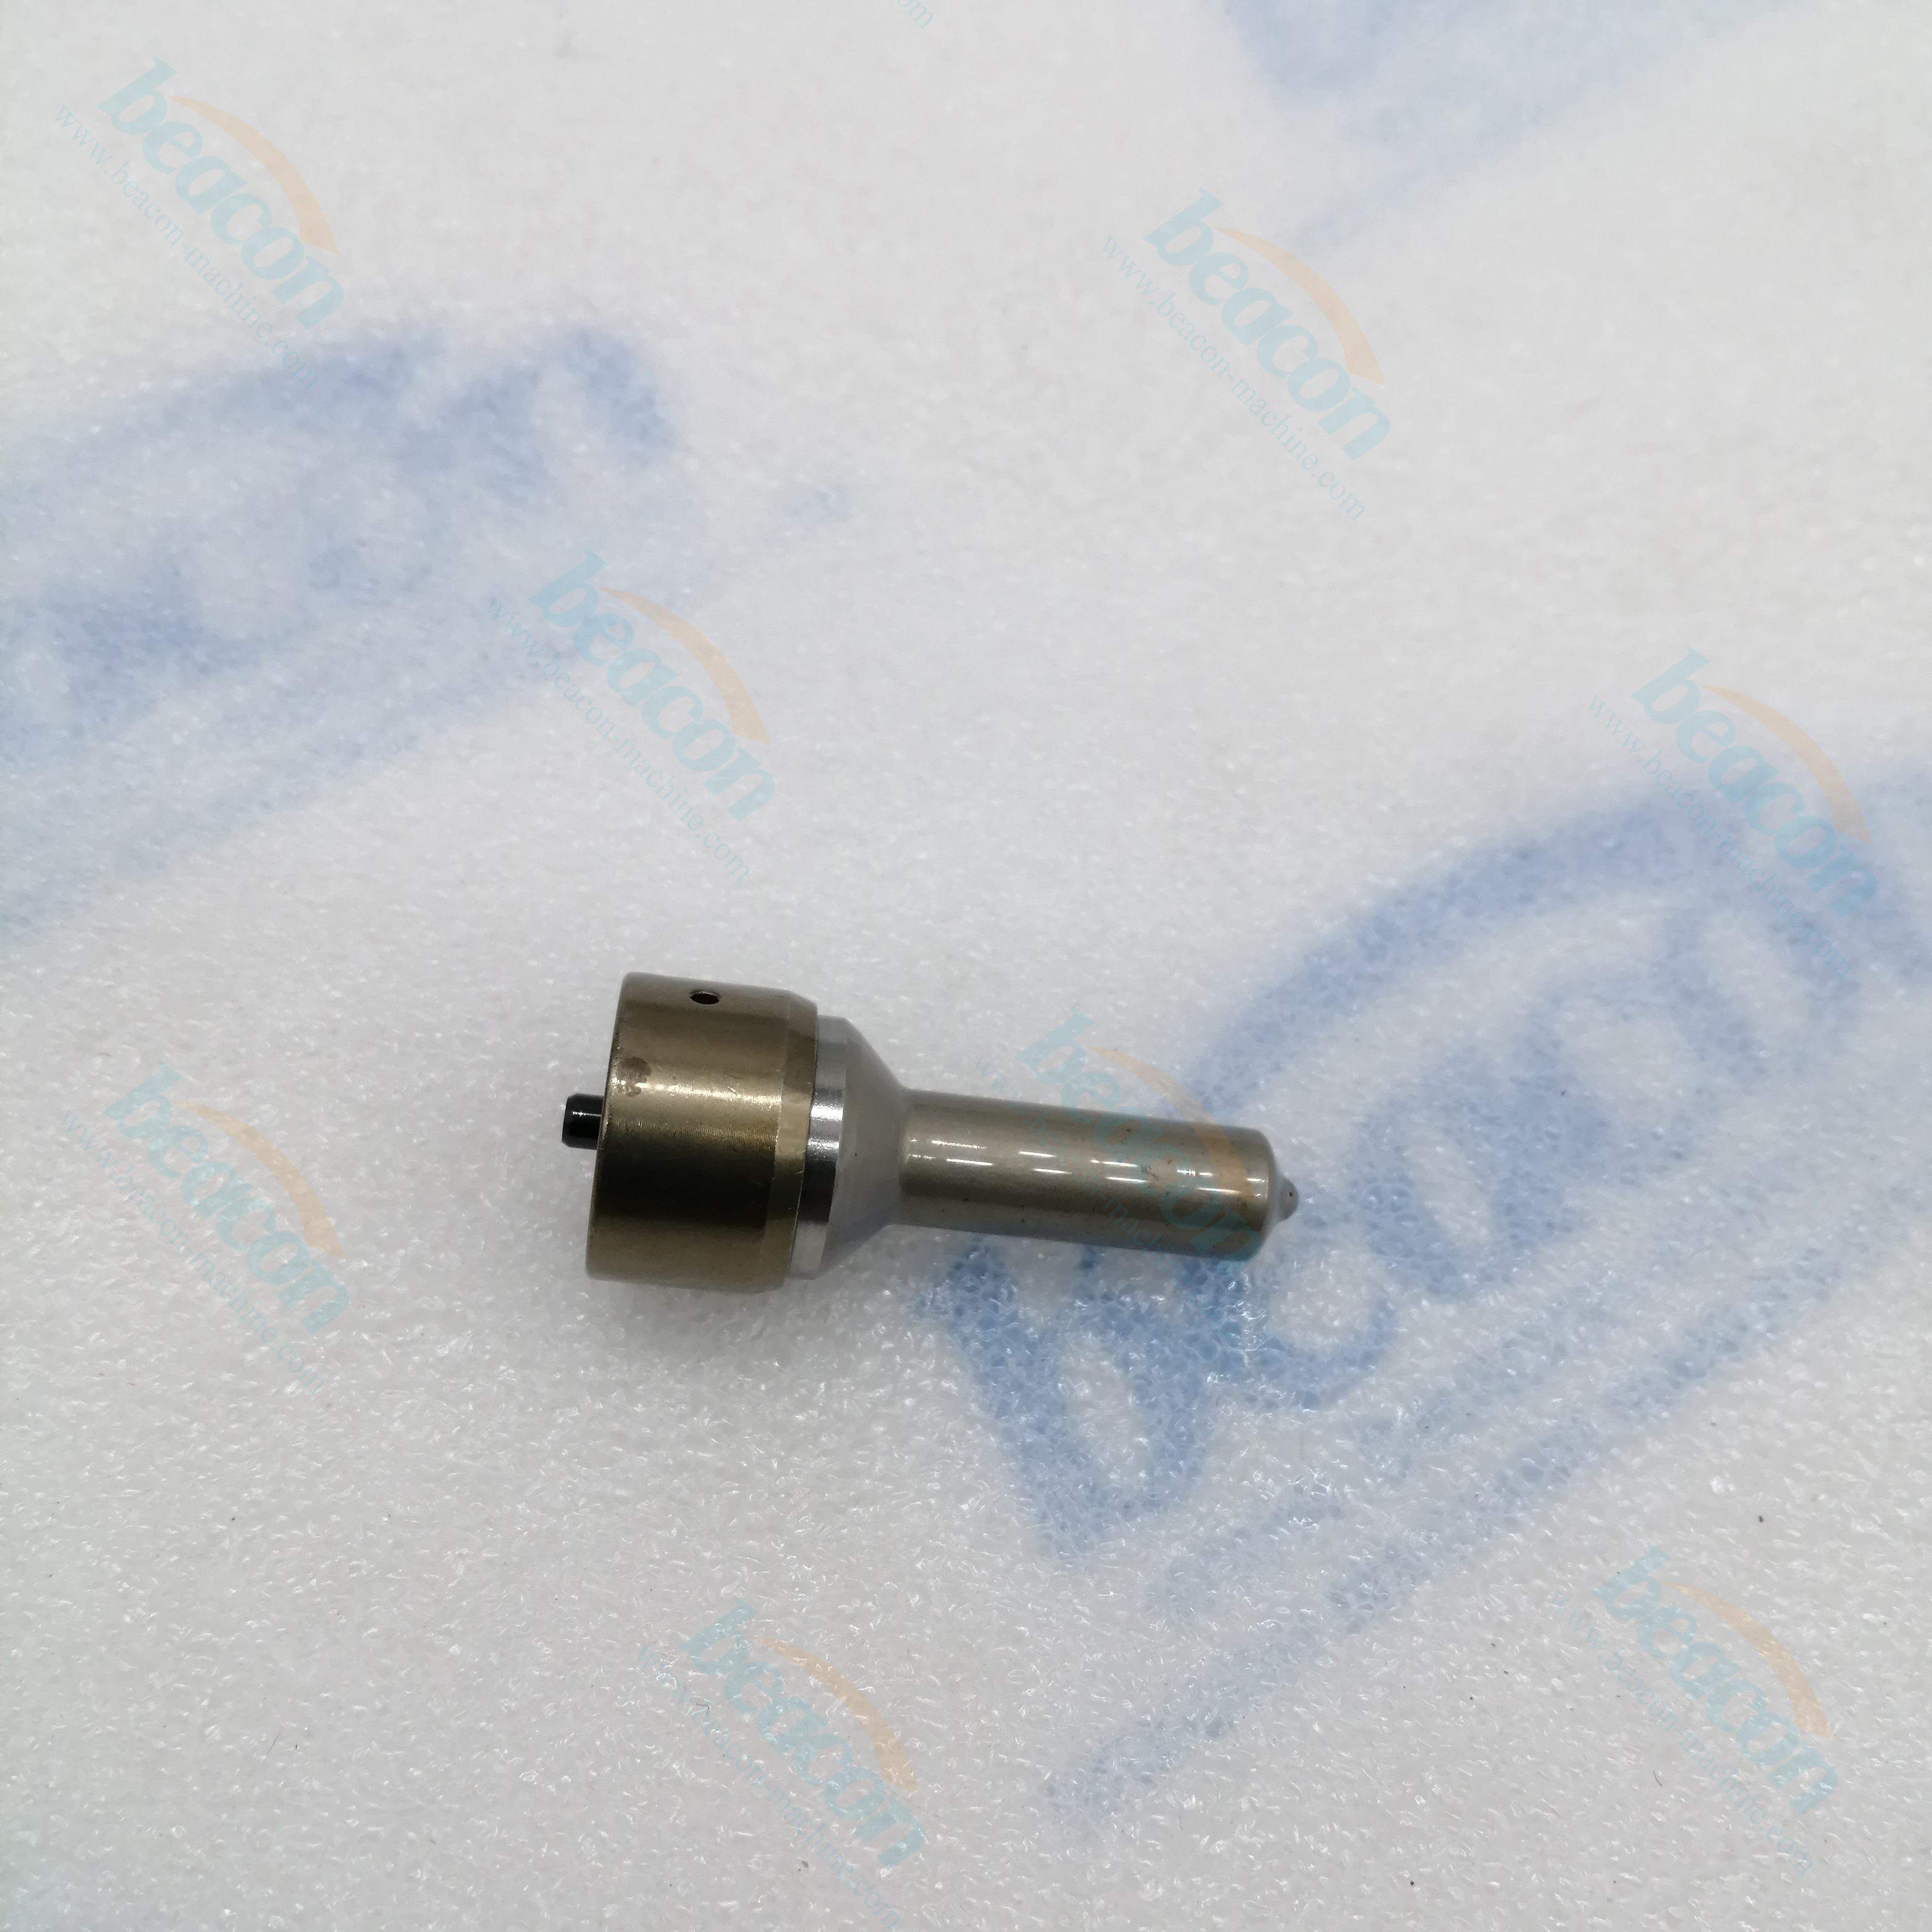 high quality Nozzle for C9 engine injector C9 injector nozzle good replacement of original